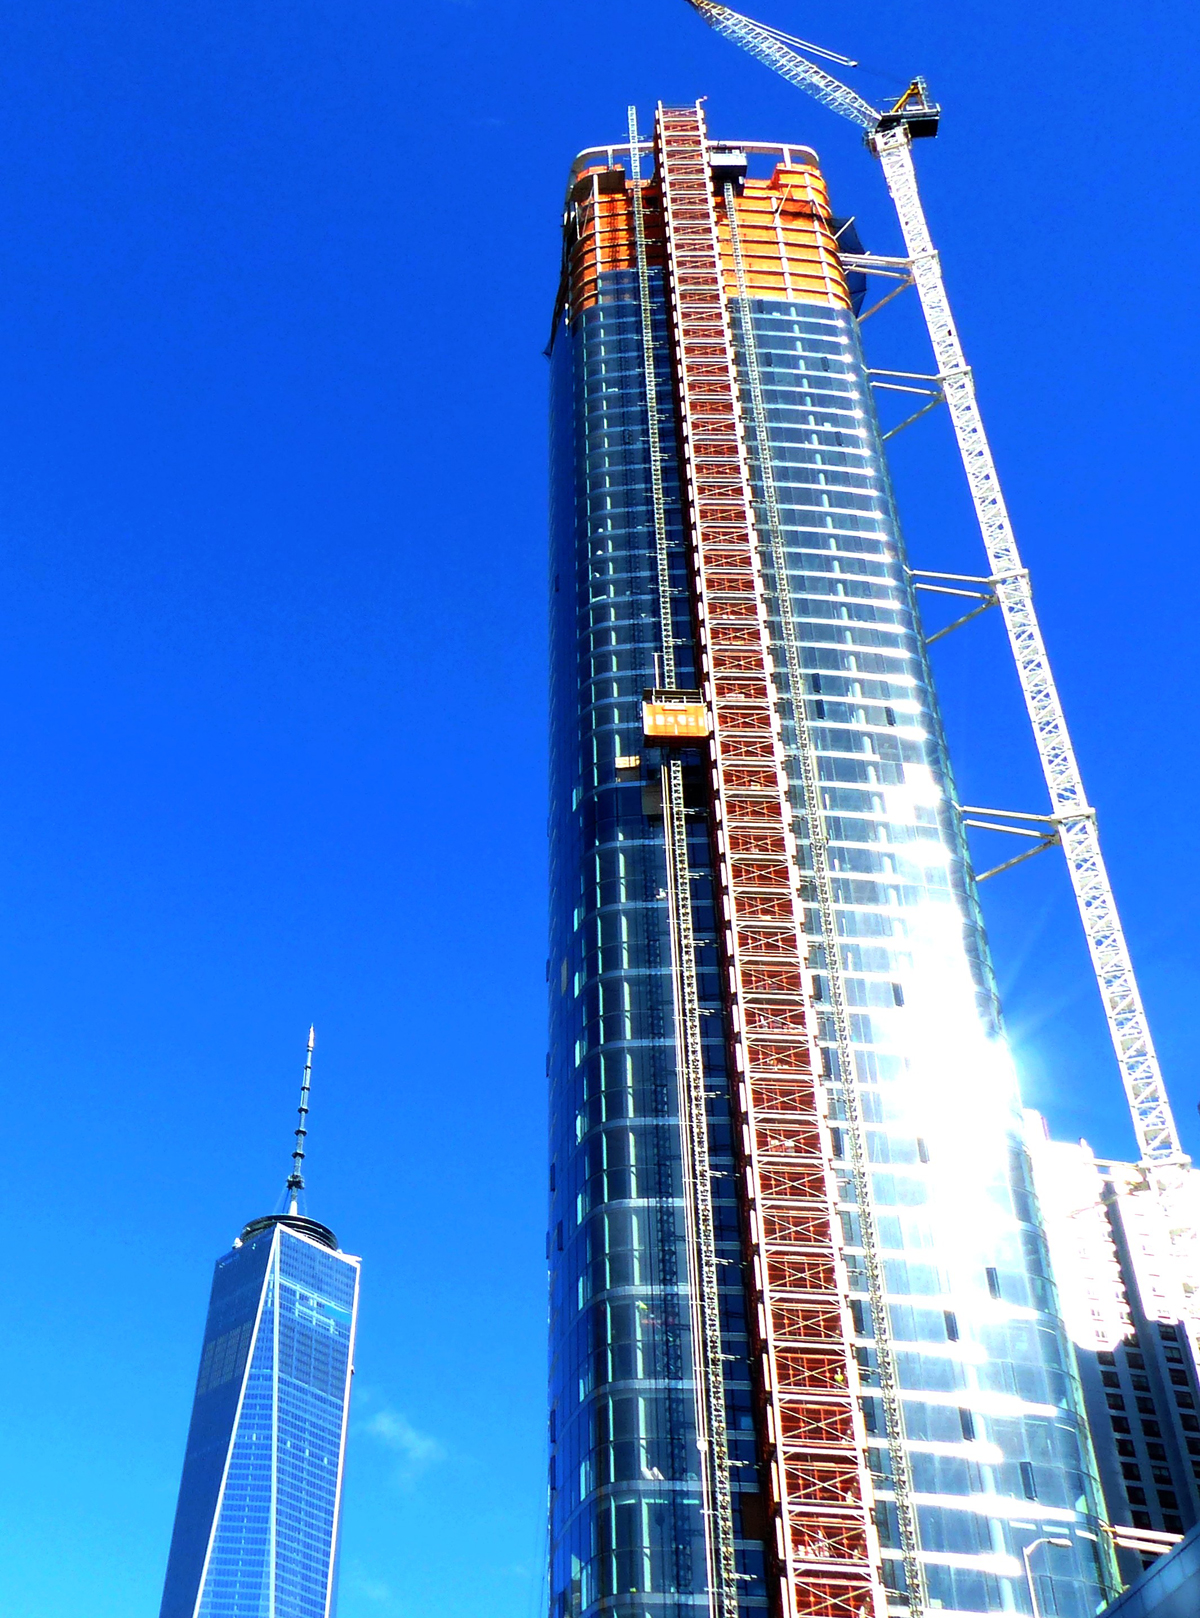 50 West Street under construction (Credit: Wikimedia Commons)